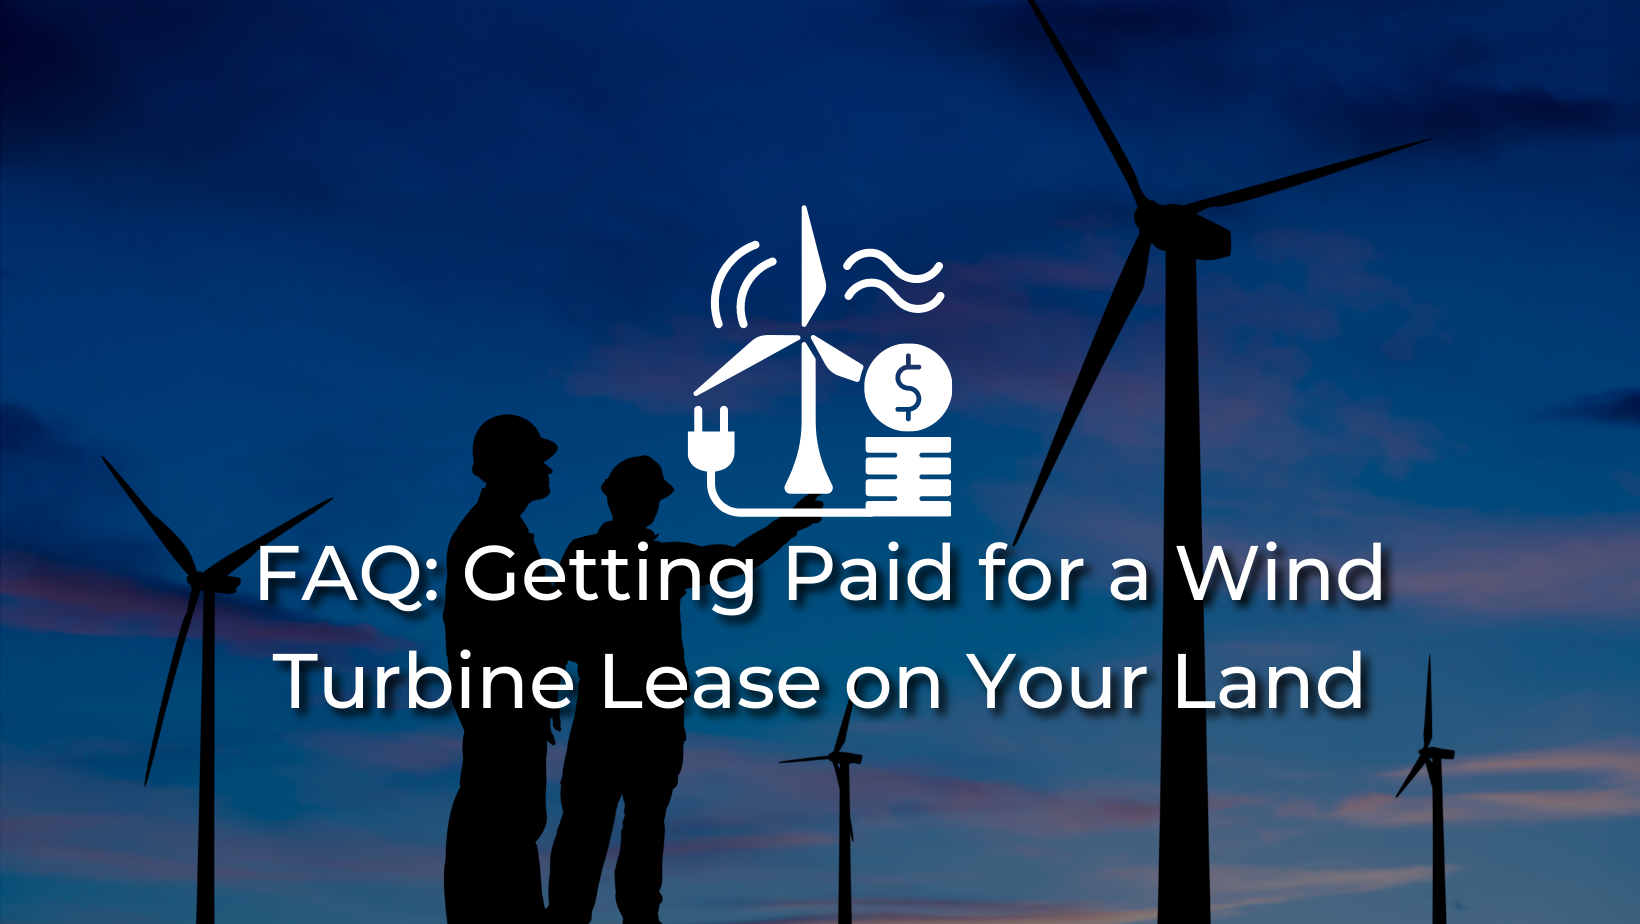 Getting Paid for a Wind Turbine Lease on Your Land